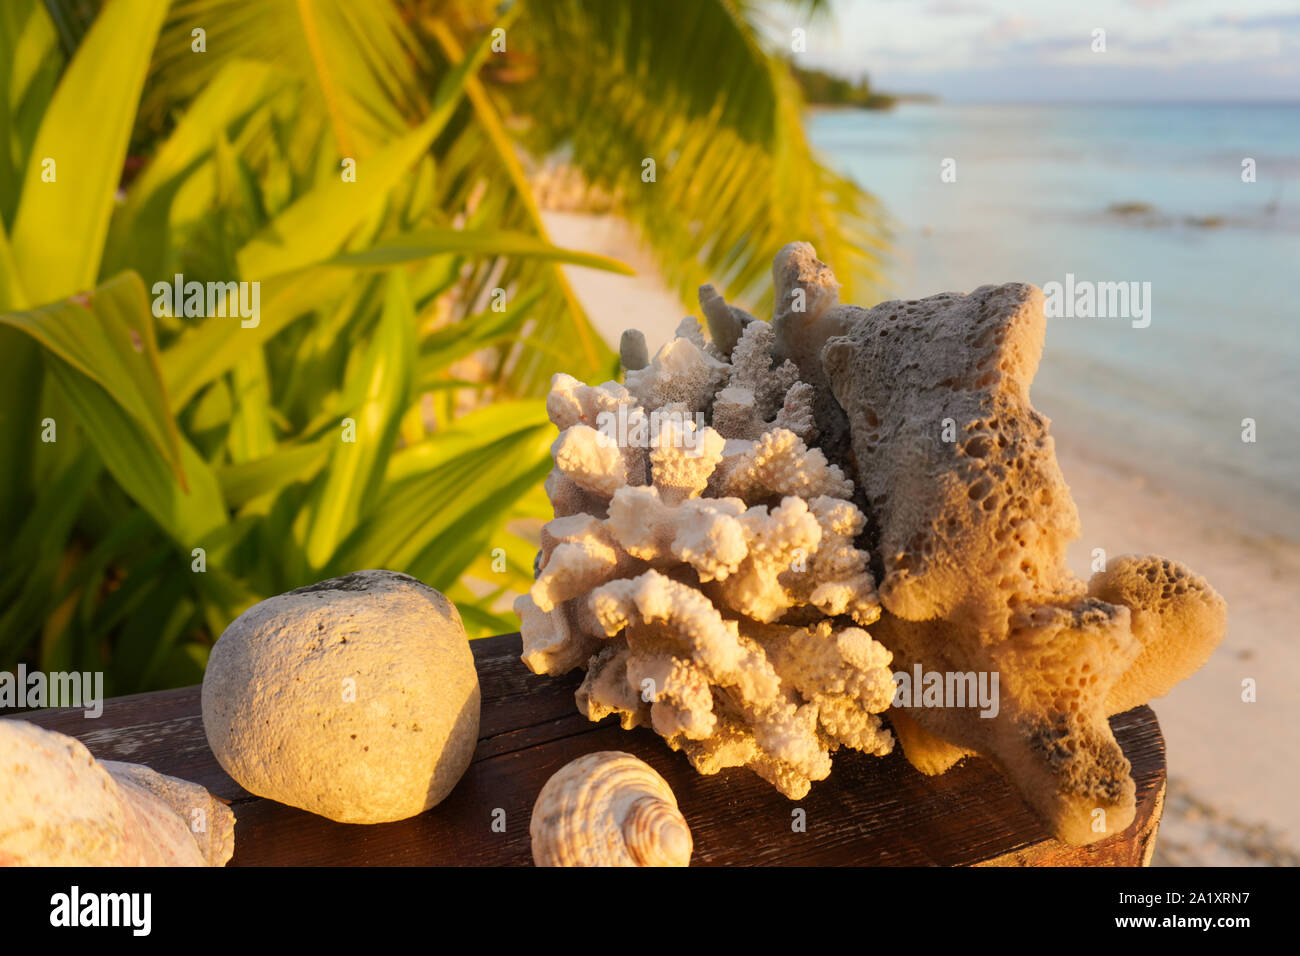 Coral and shells rest on a bungalow deck railing in front of palm trees and a sandy beach and blue ocean Stock Photo